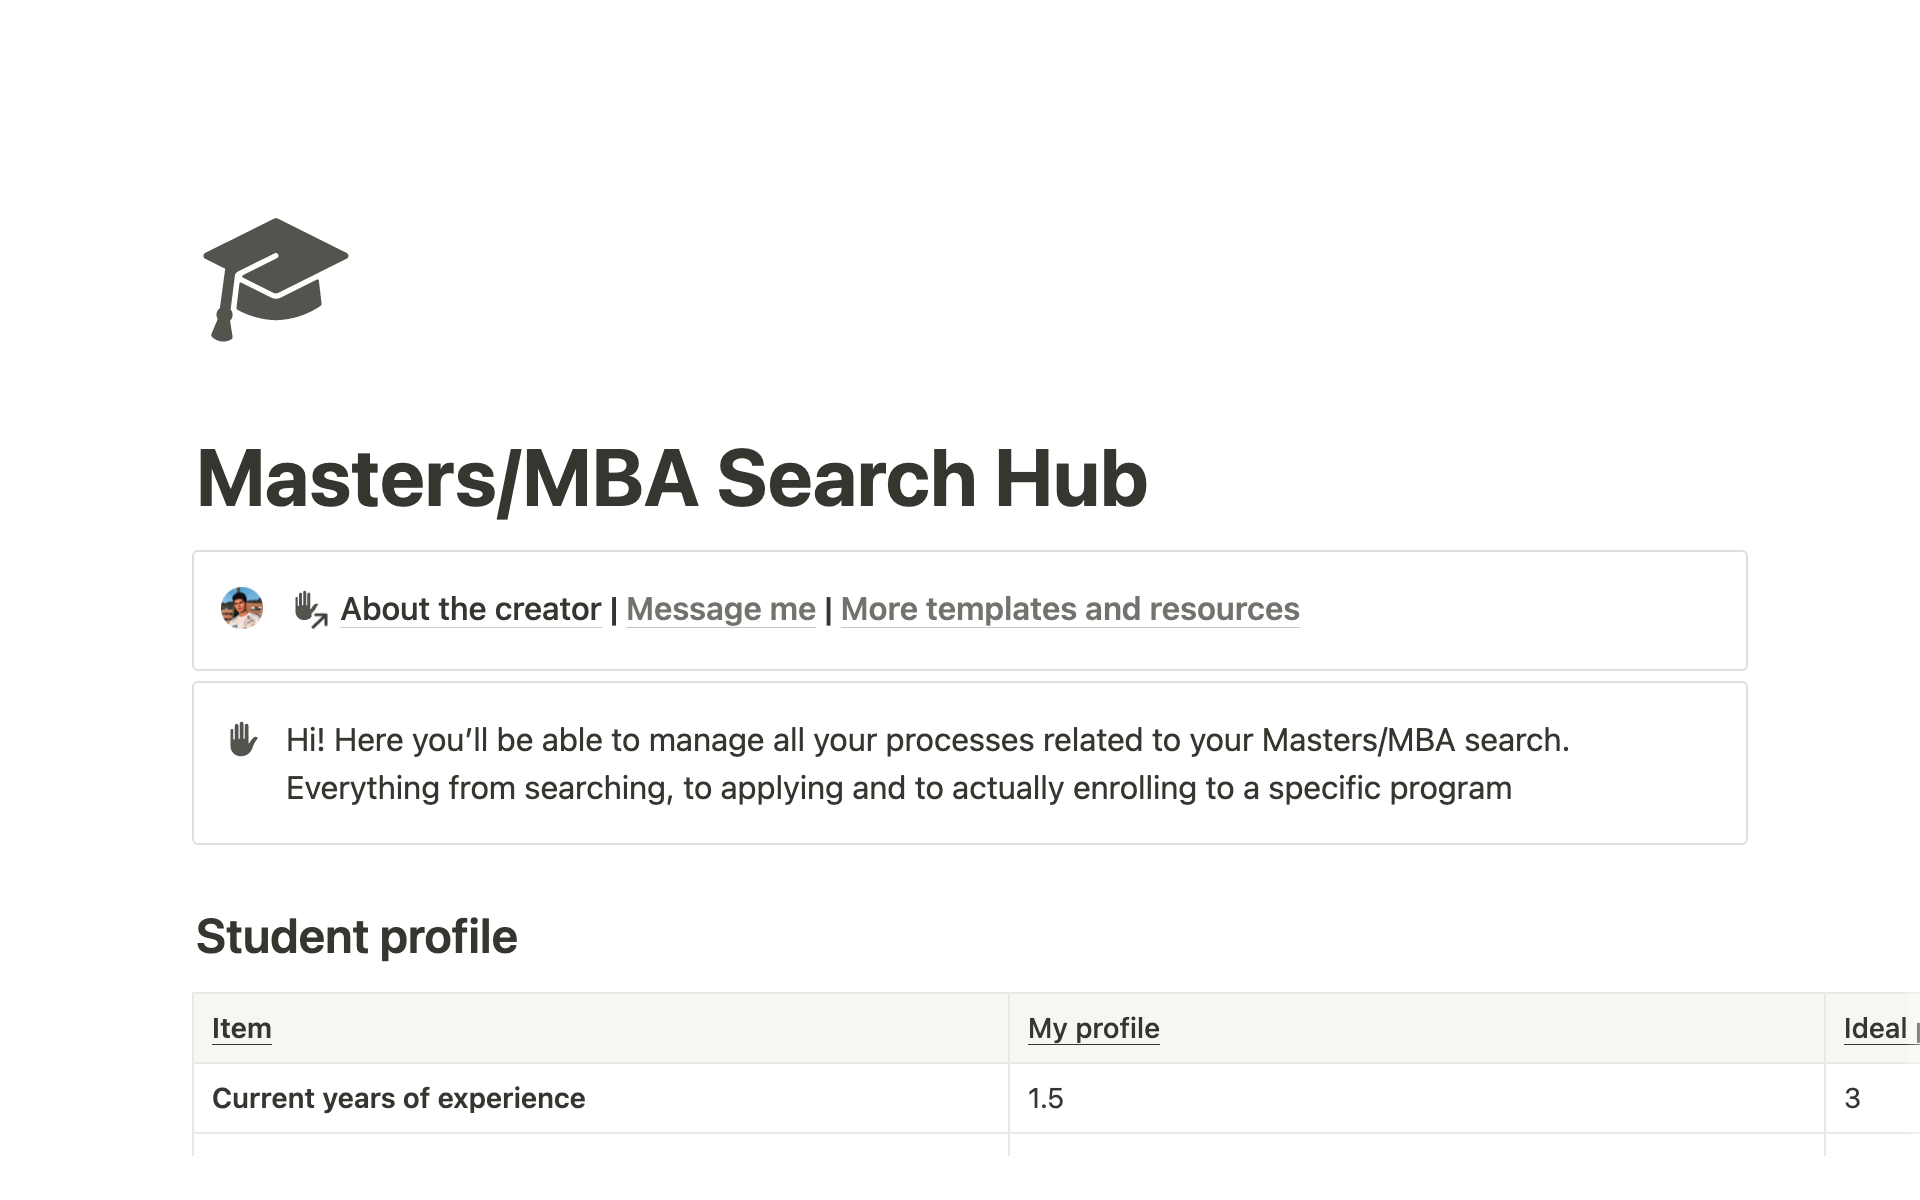 Let's you completely manage your Master's/MBA search, application, and enrollment processes.